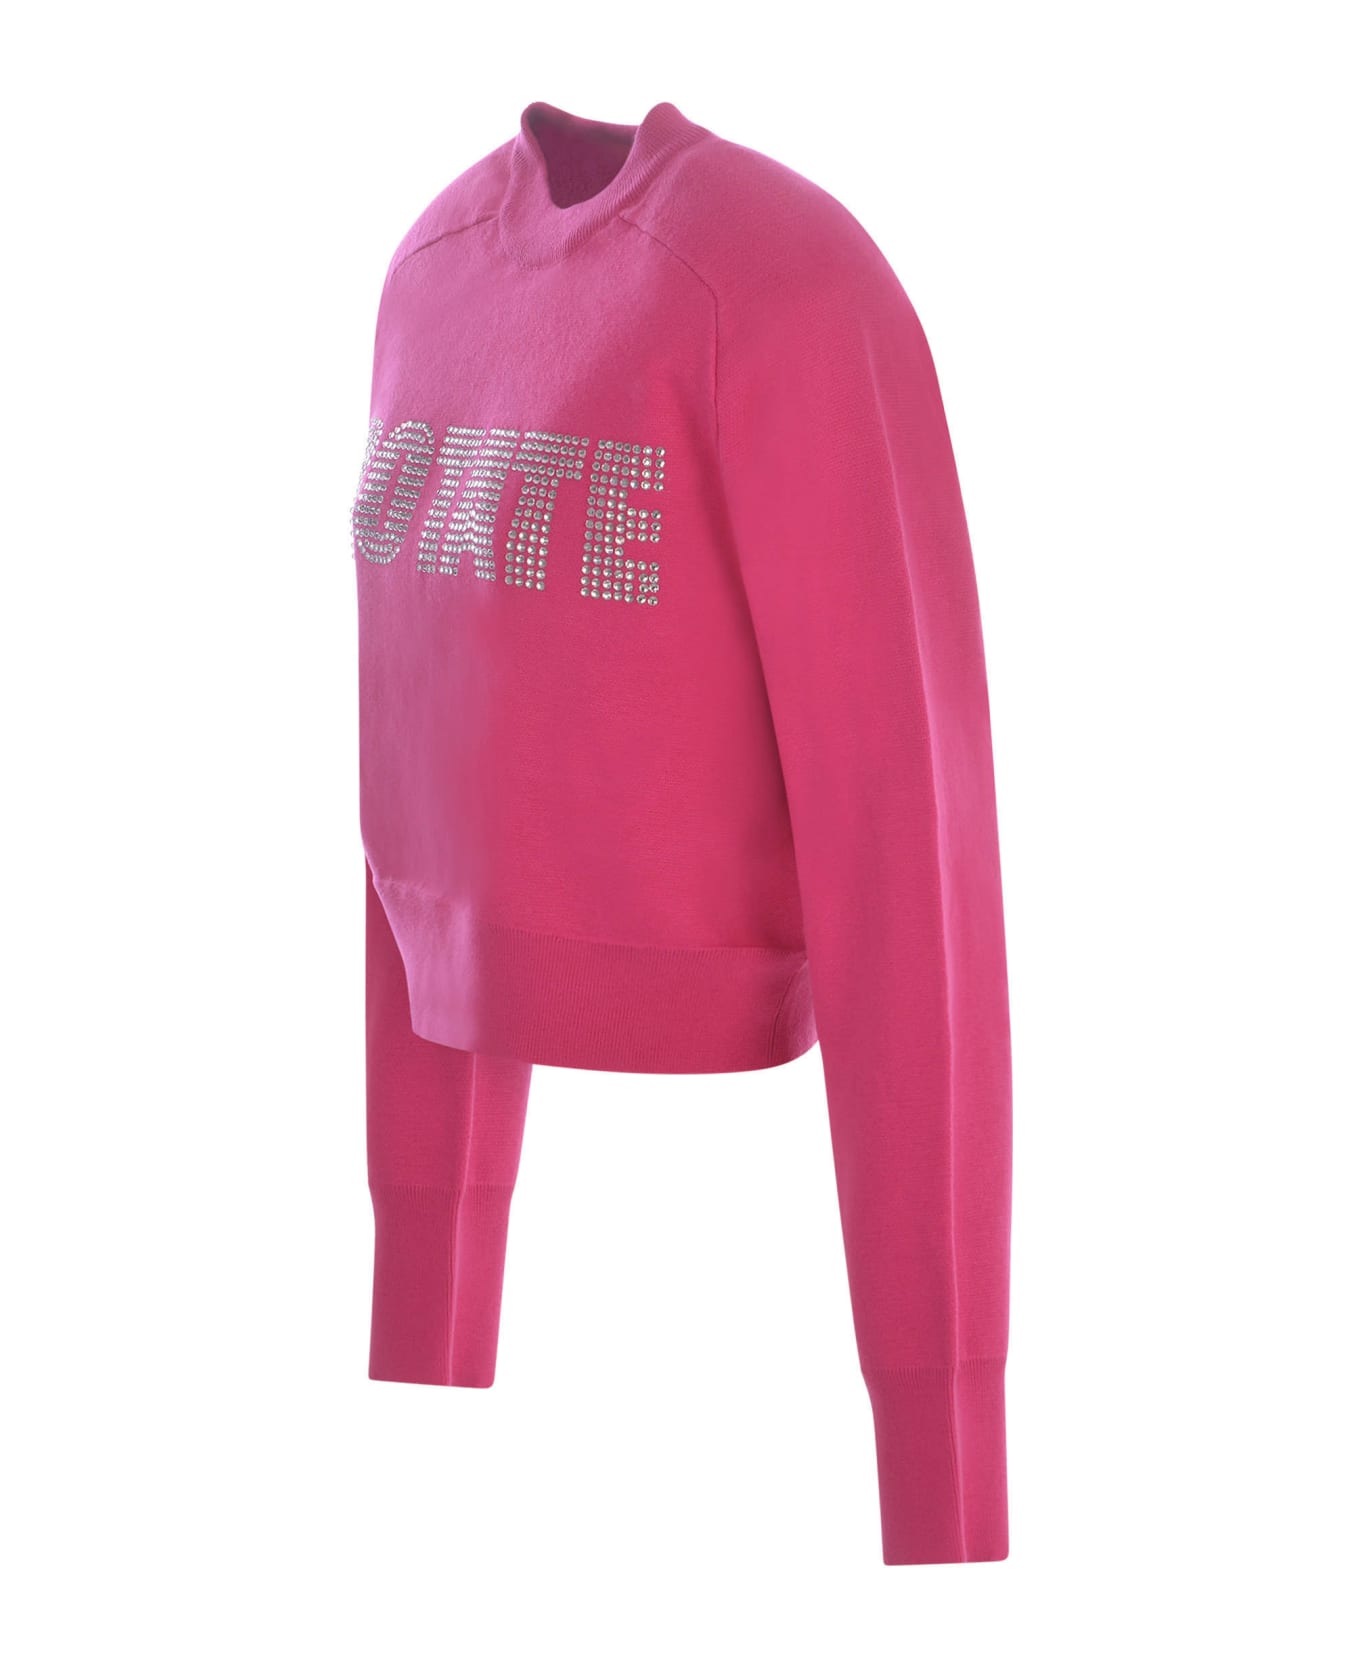 Rotate by Birger Christensen Sweatshirt Rotate In Cotton And Cashmere Blend - Fucsia